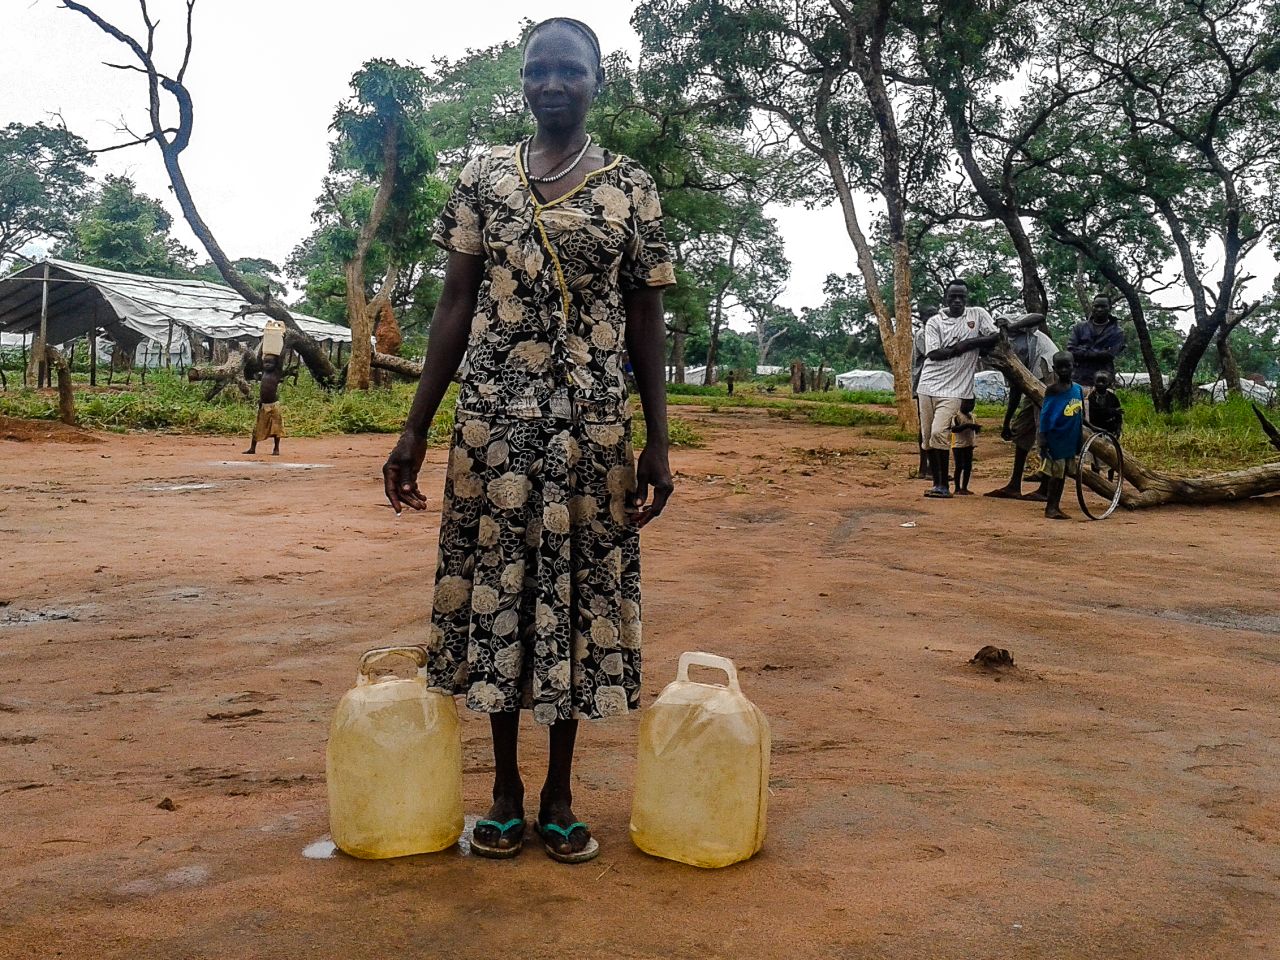 <br />"She brought water from a distance, until she was tired. That is why she is resting. Water is fetched for cooking and keeping homes clean. But the problem is that people need bigger jerry cans, these small ones don't help much."